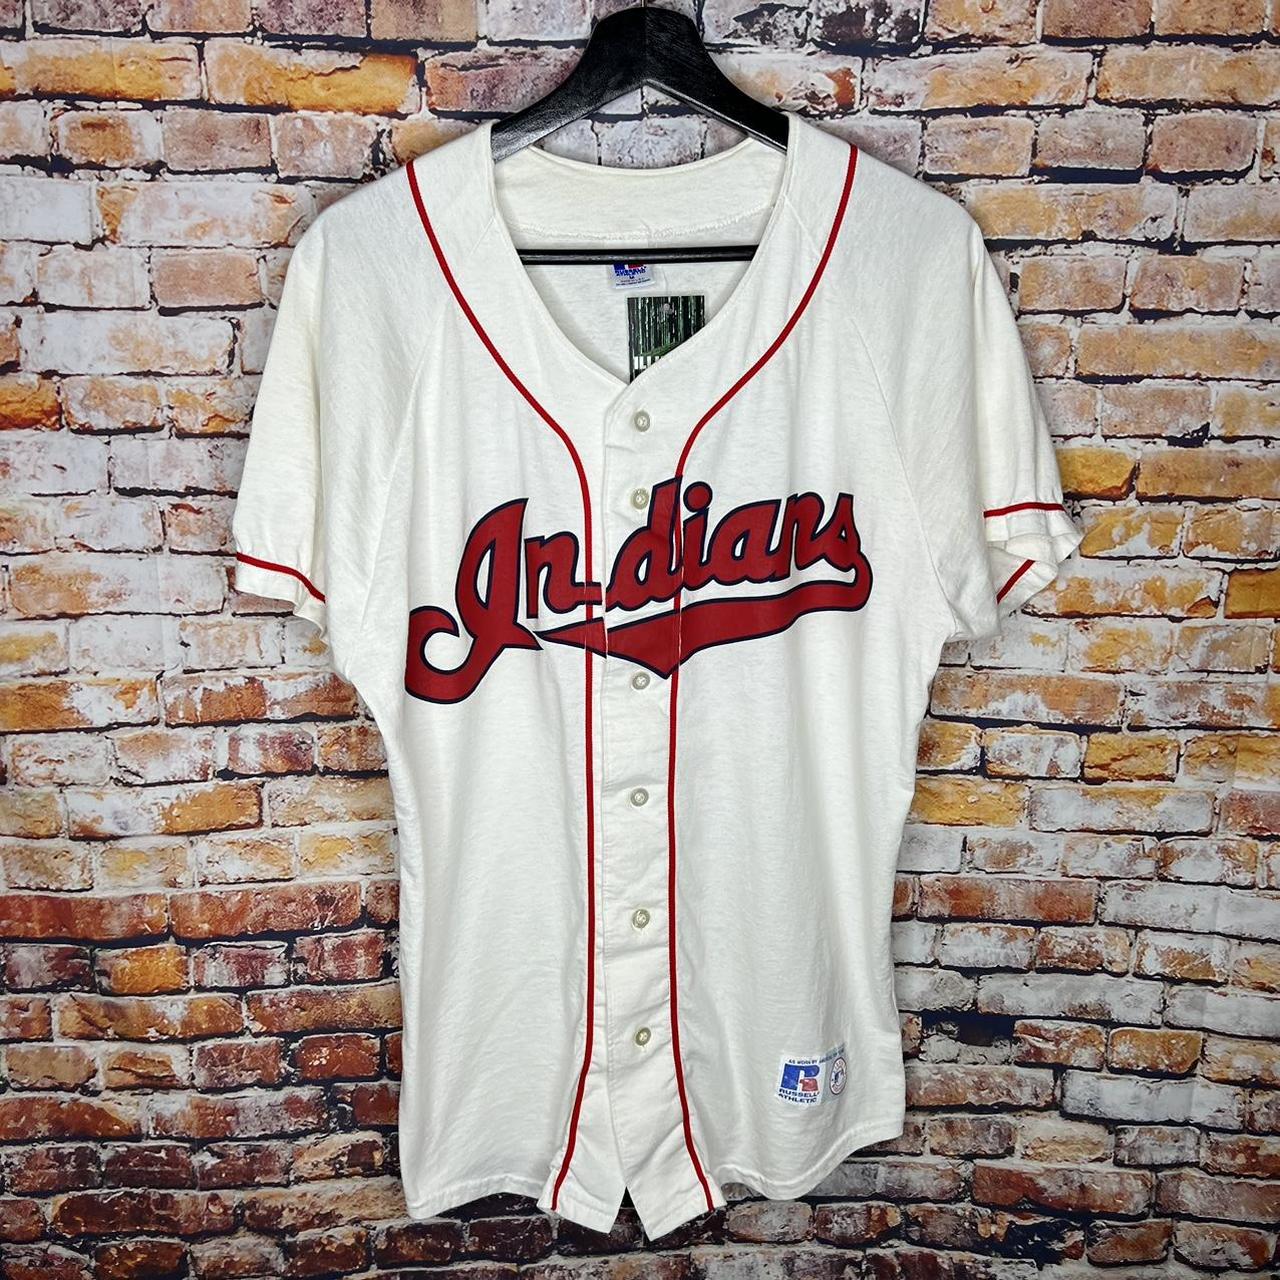 Vintage Russell Athletic Cleveland Indians MLB Baseball Jersey